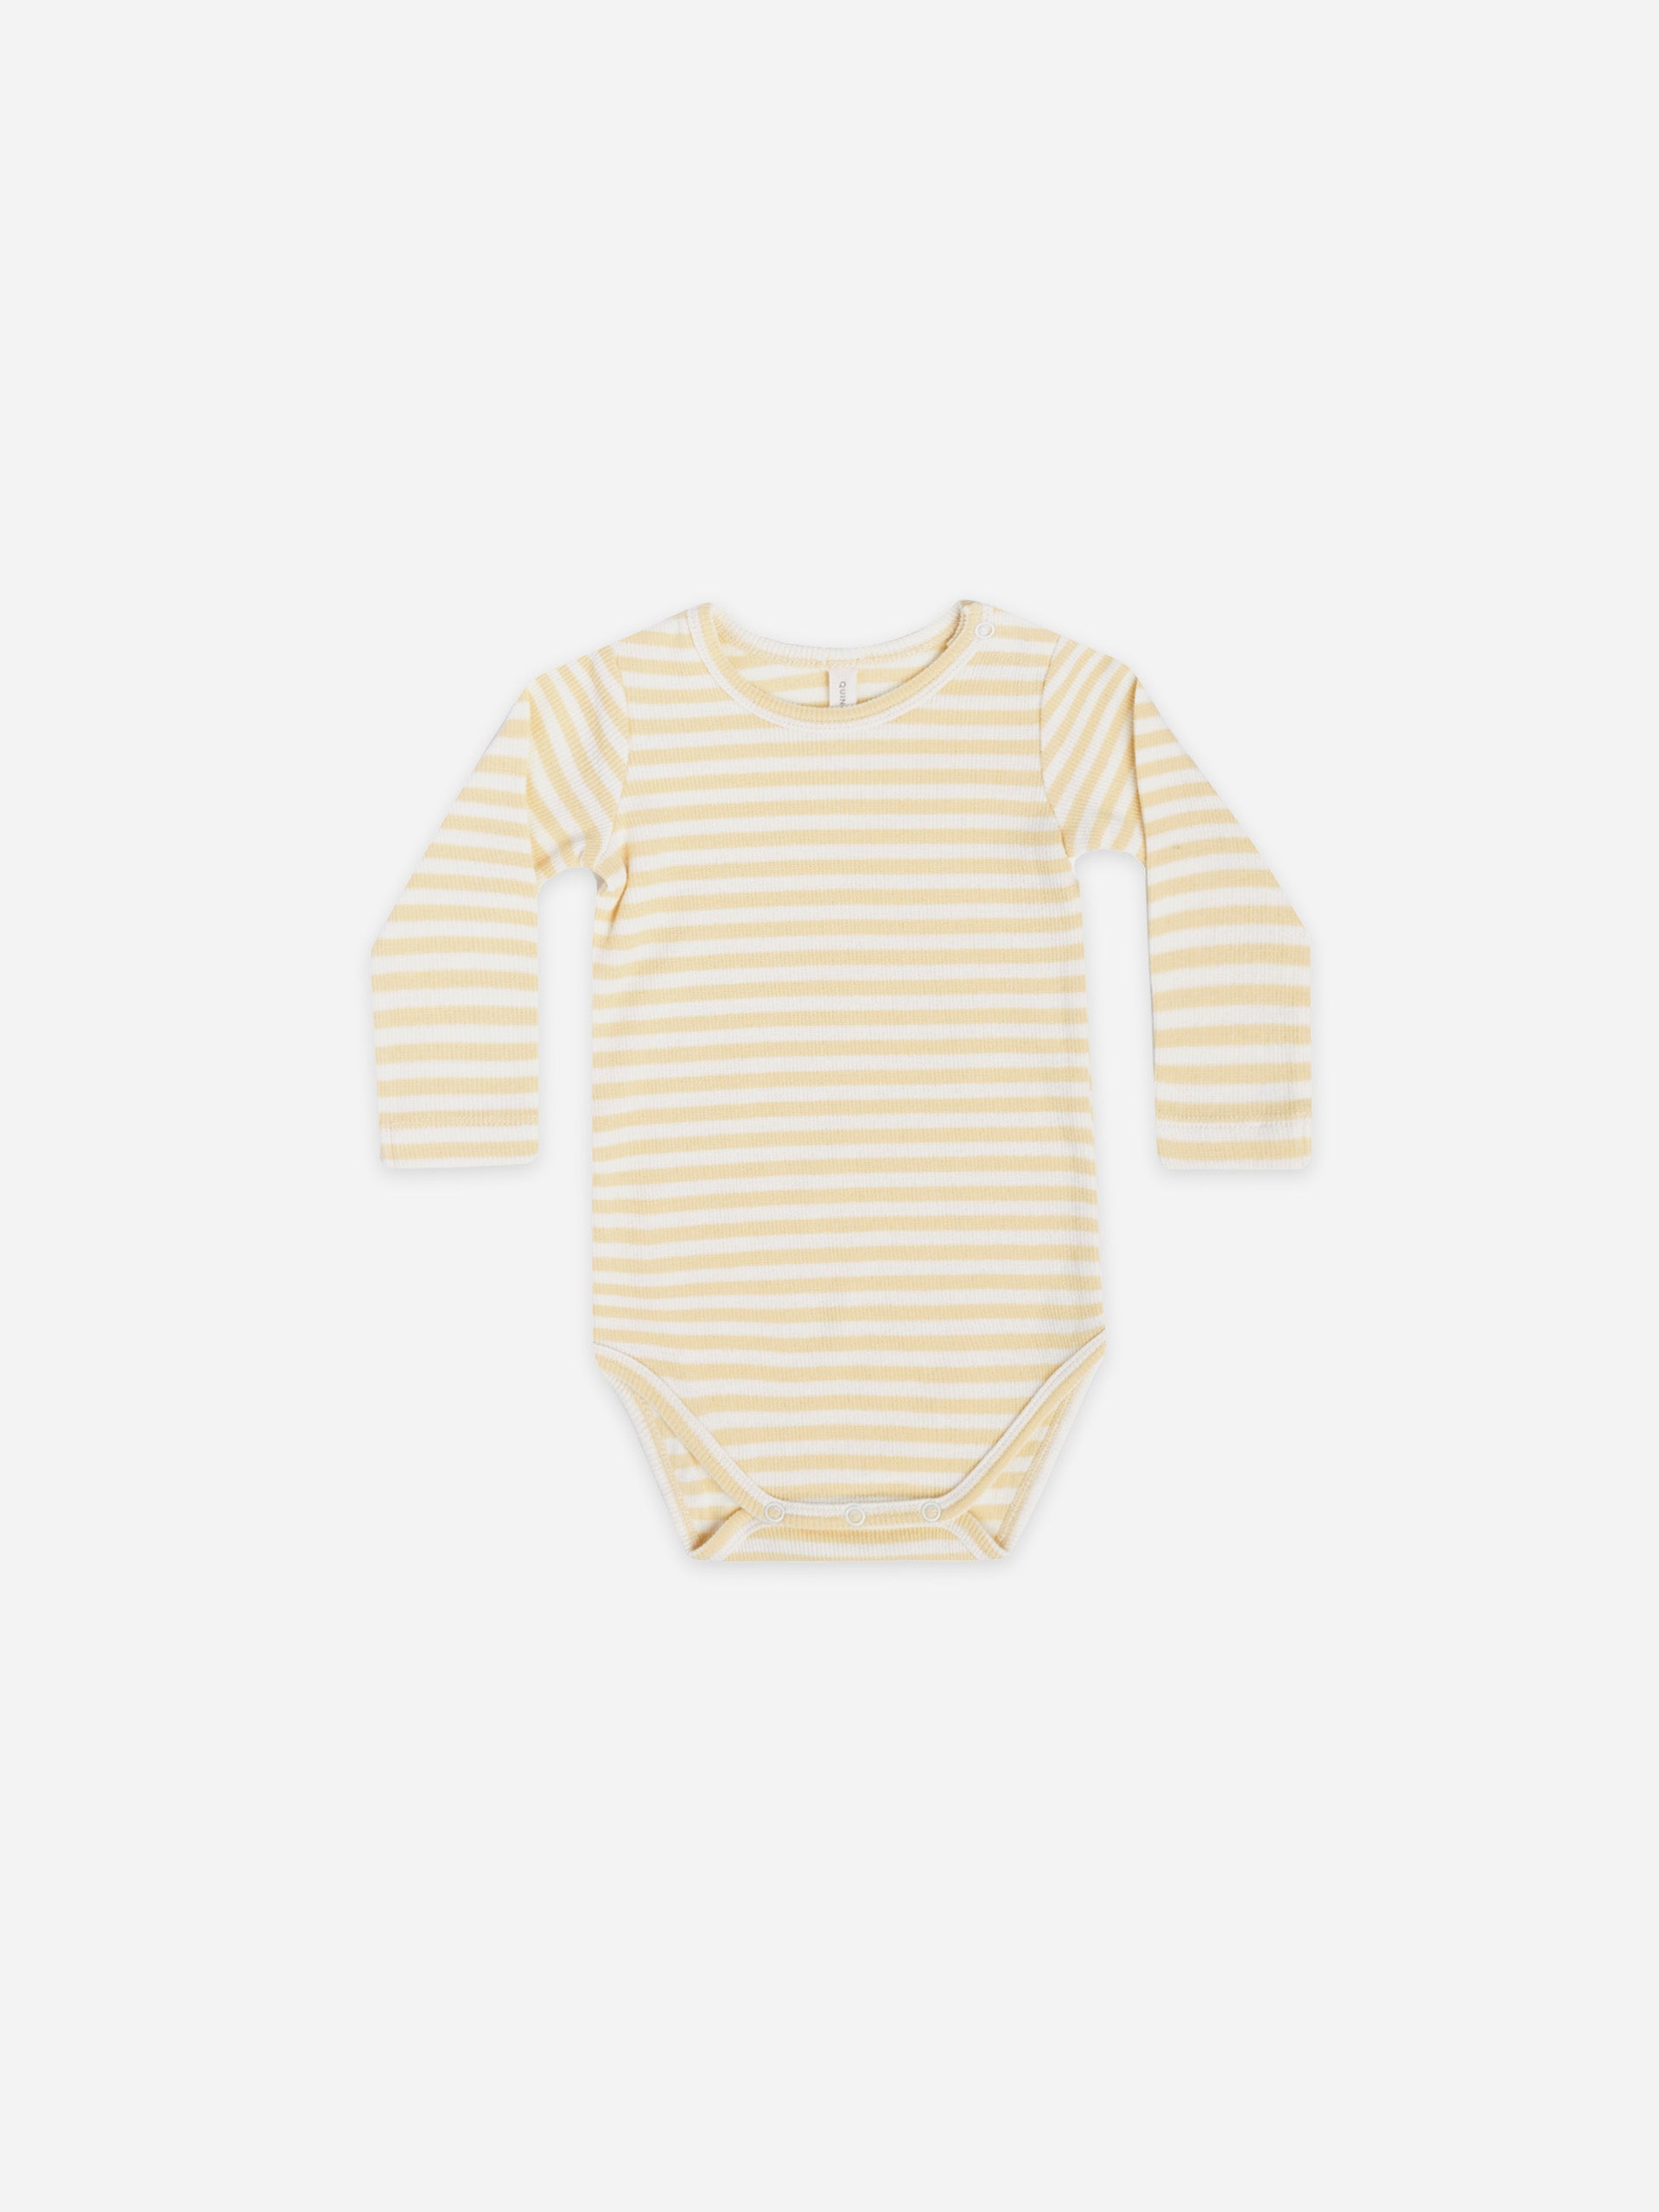 ribbed bodysuit | yellow stripe - Quincy Mae | Baby Basics | Baby Clothing | Organic Baby Clothes | Modern Baby Boy Clothes |